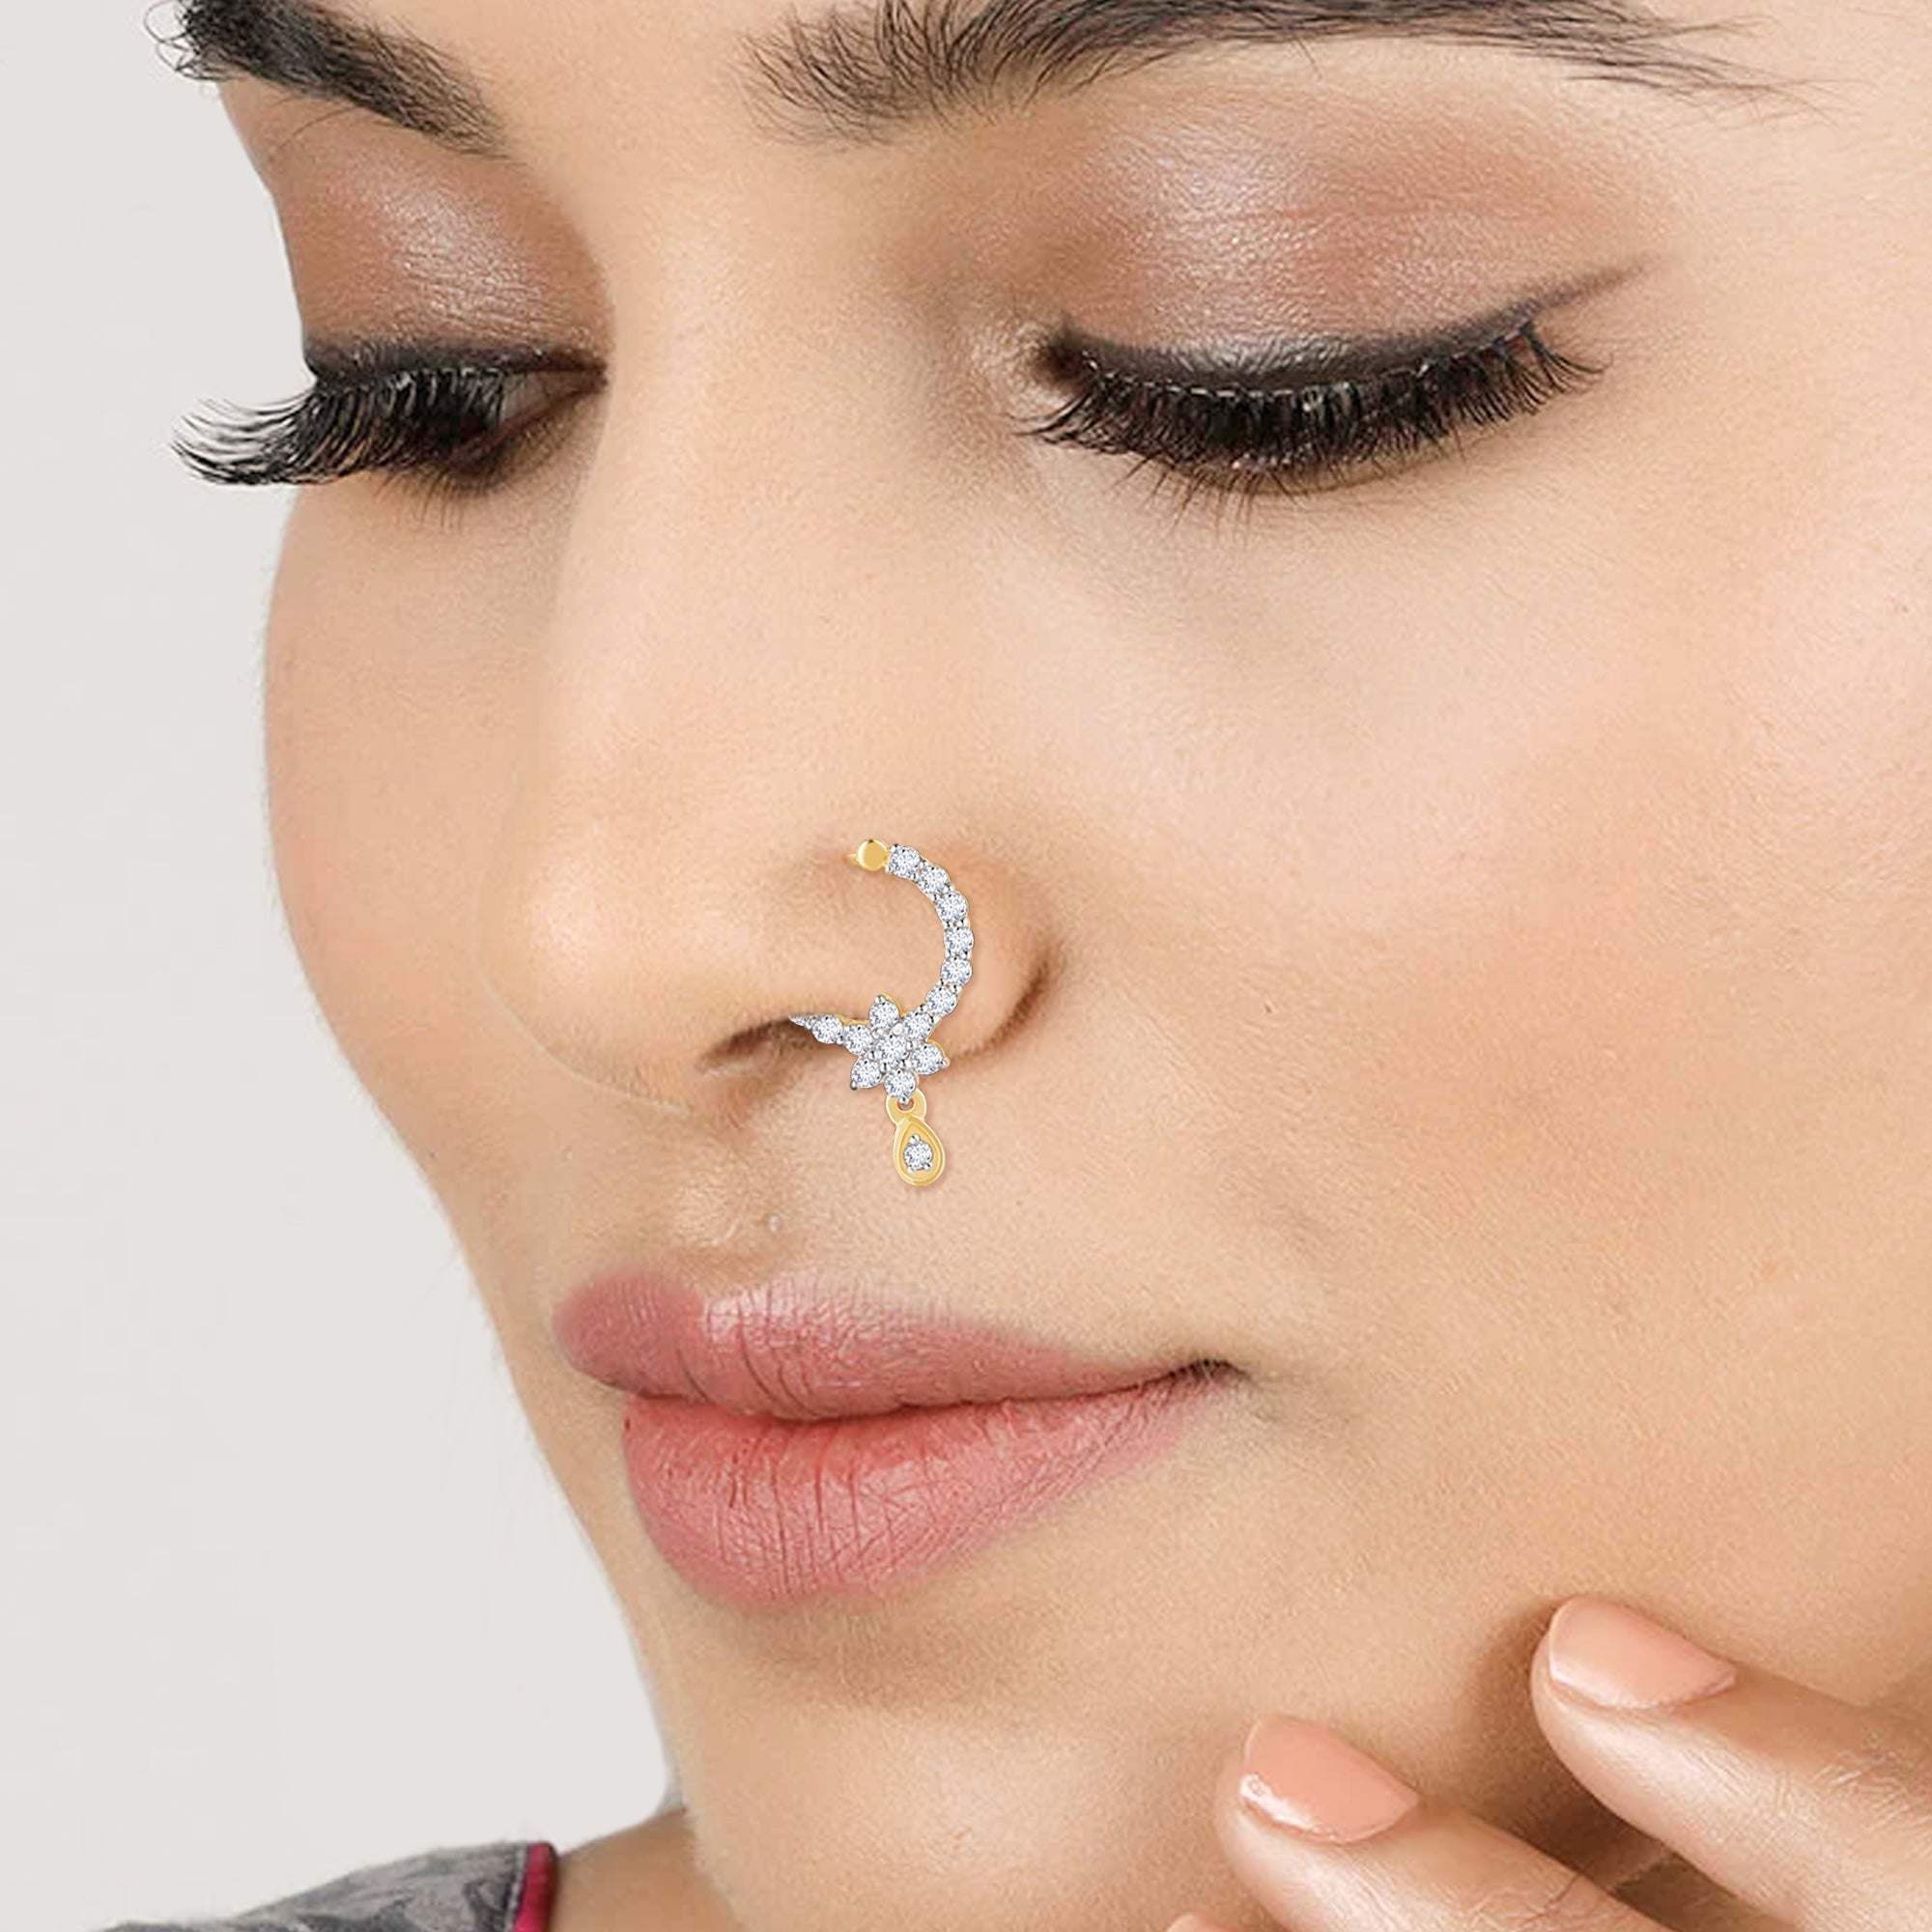 18K Gold Nose Pin, Nose Stud Piercing with CZ Crystal - Beautiful Nose Ring/  Stud with the